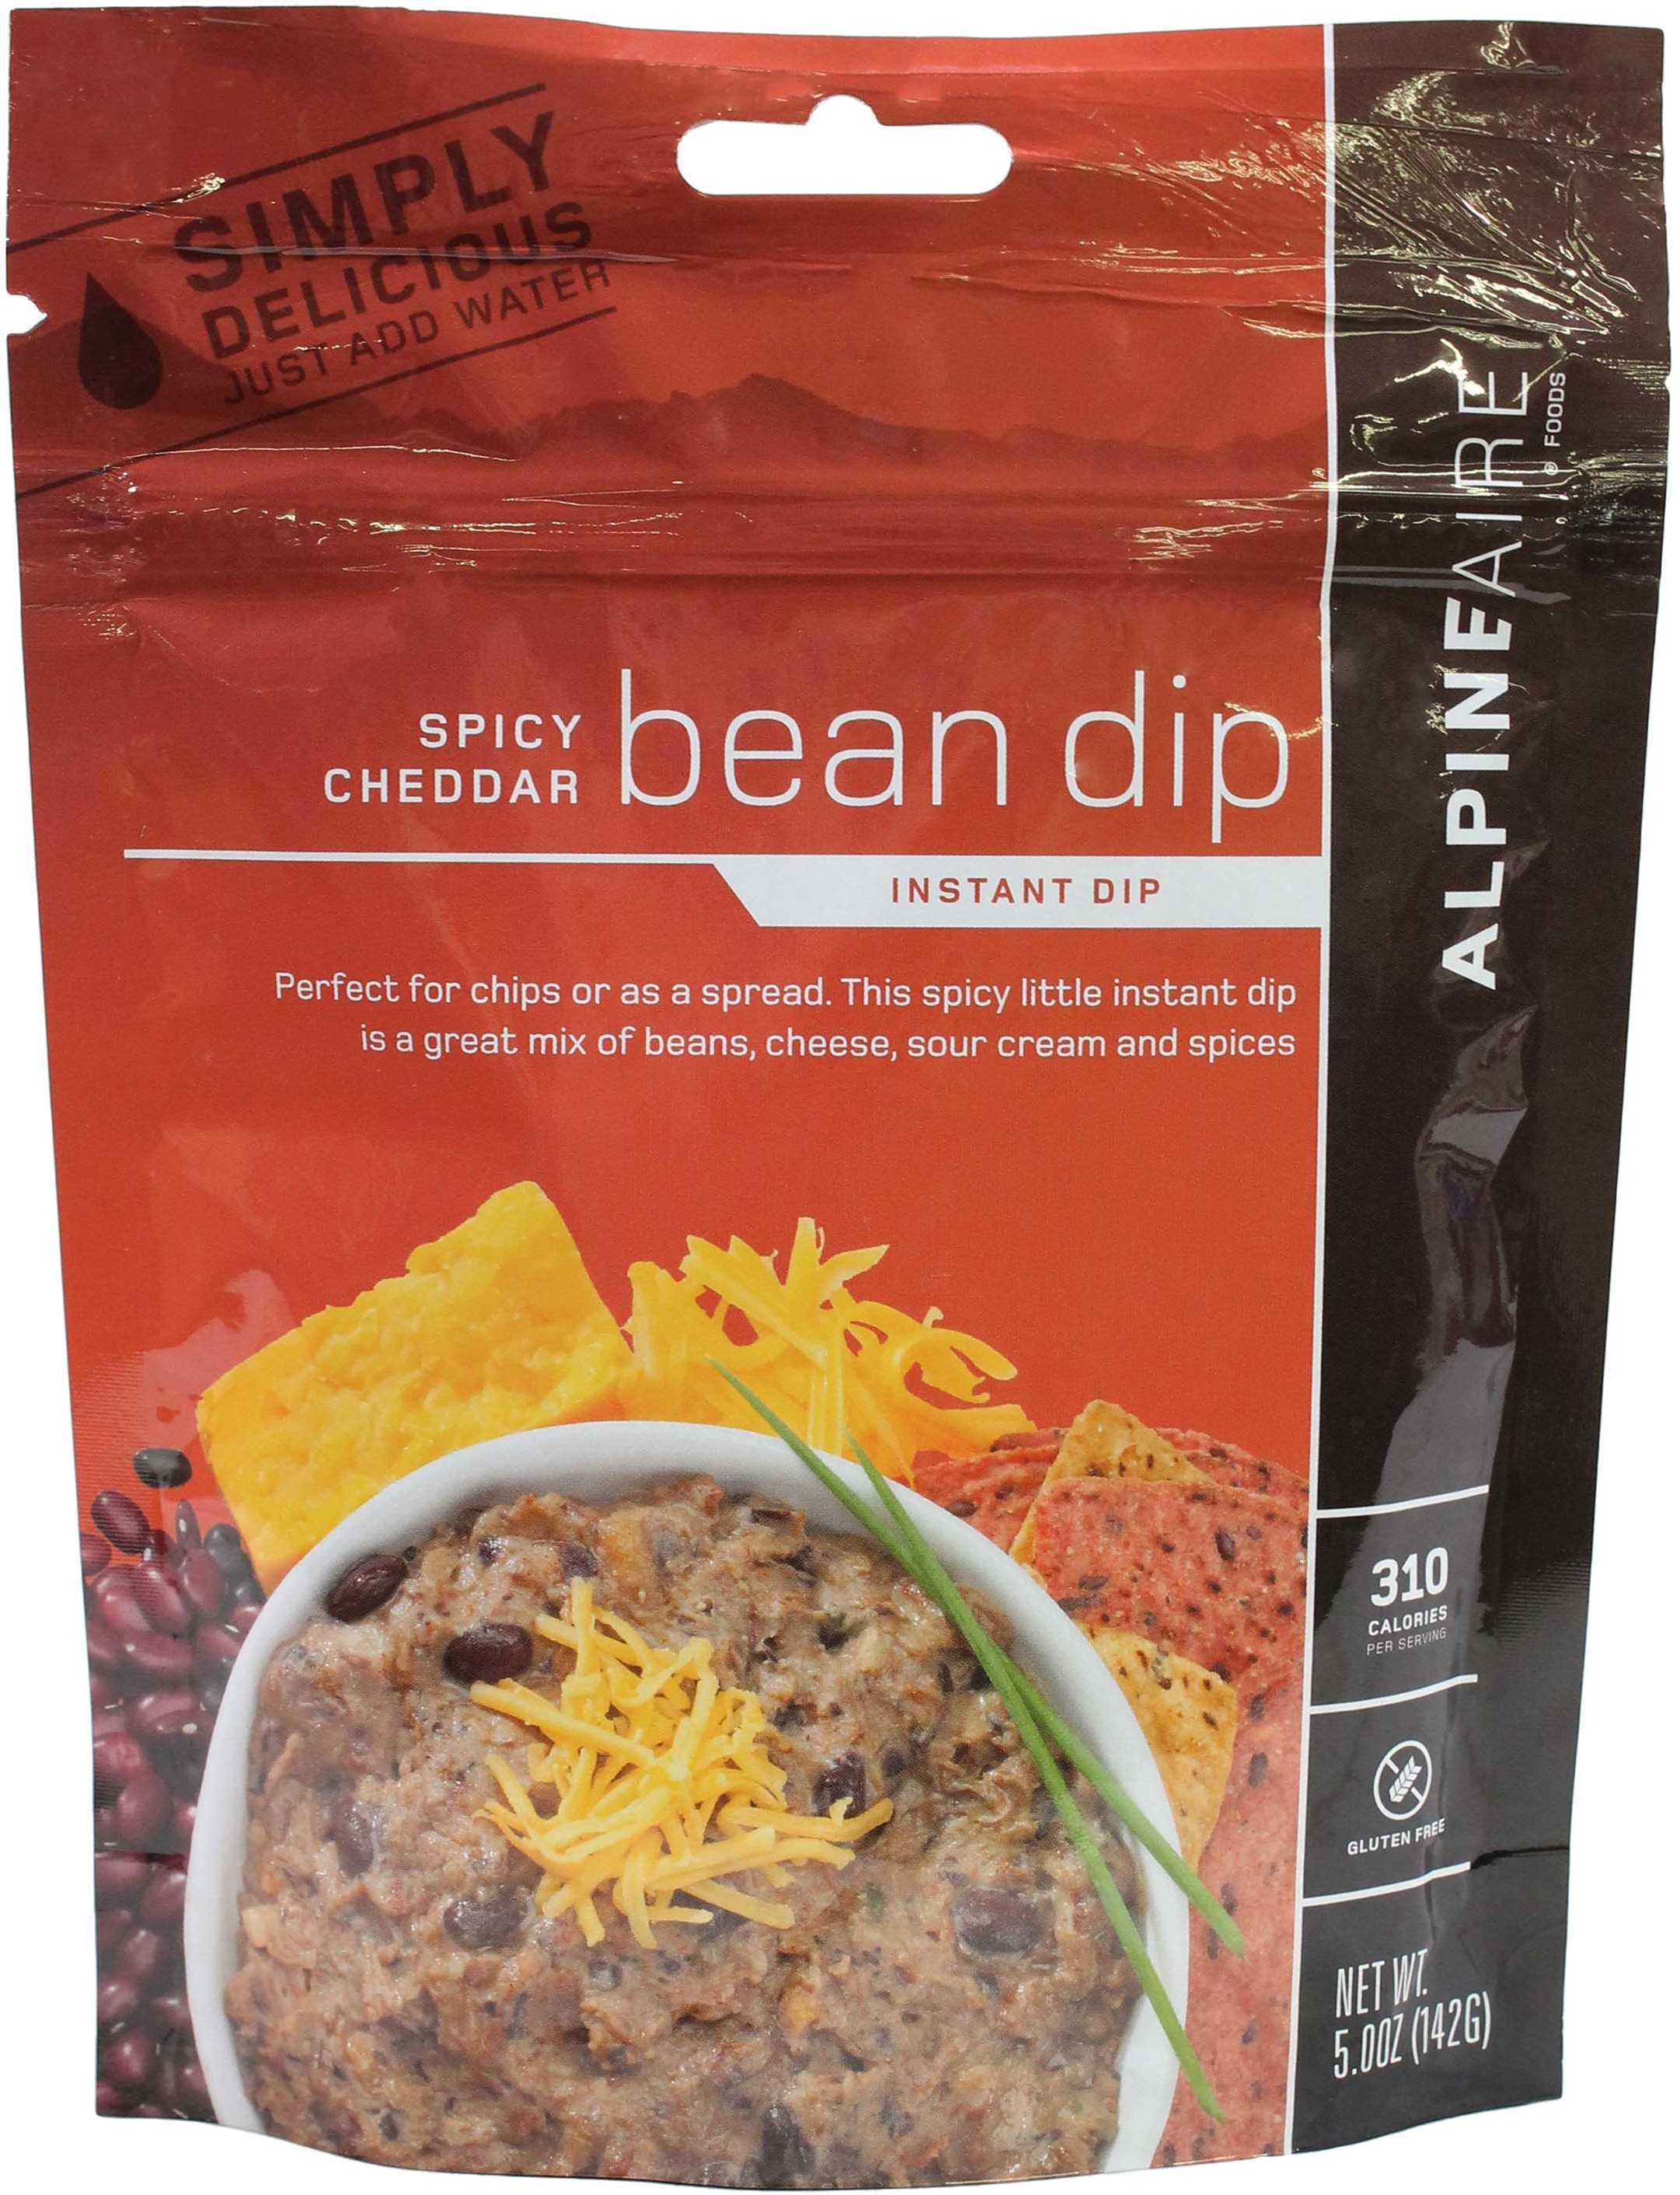 Alpine Aire Foods Spicy Cheddar Bean Dip Md: 30127